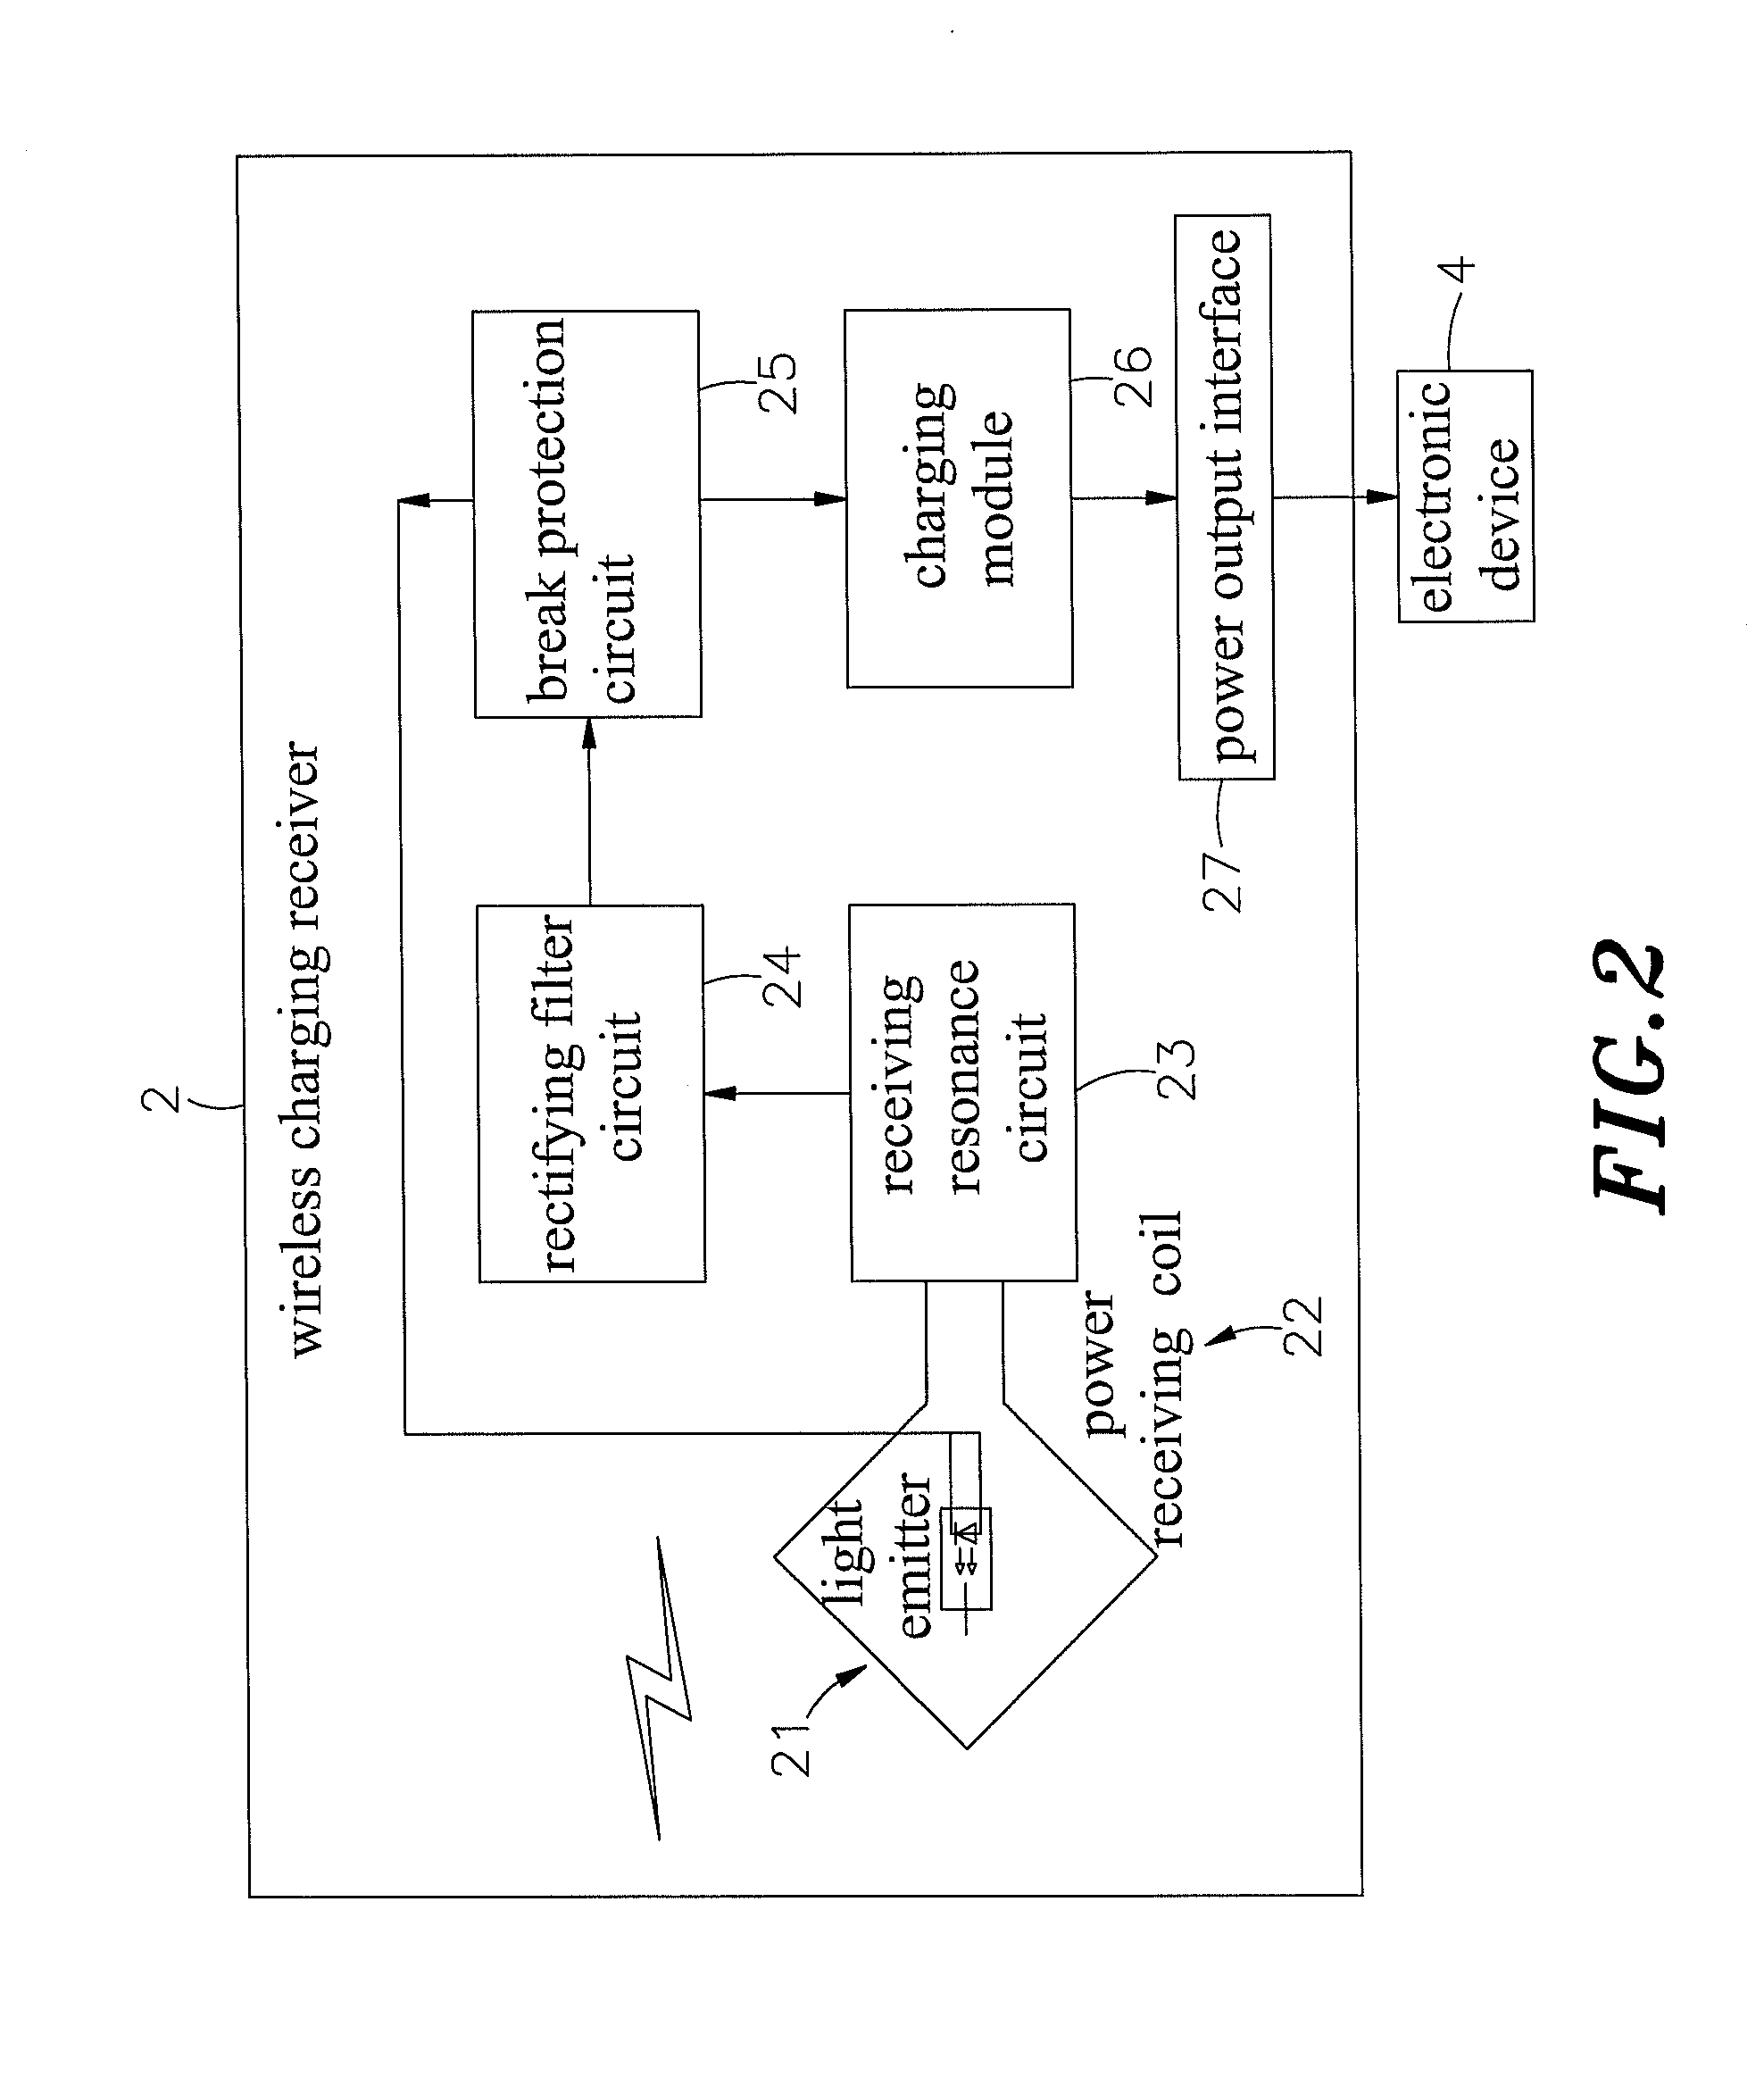 Method for identification of a light inductive charger